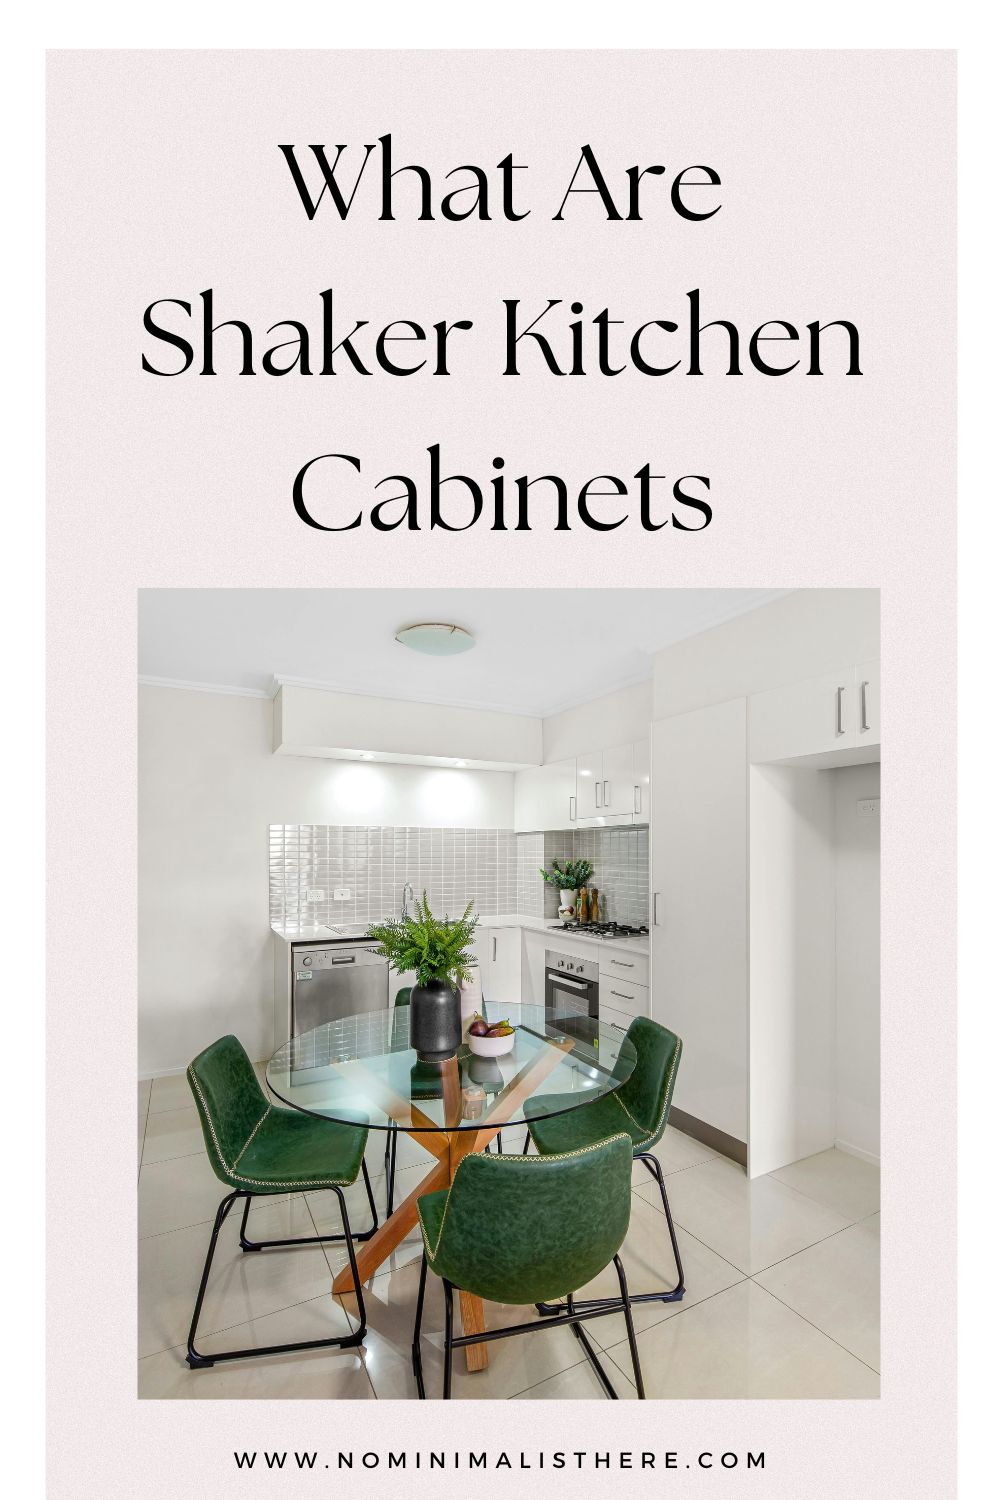 pinterest image about What Are Shaker Kitchen Cabinets